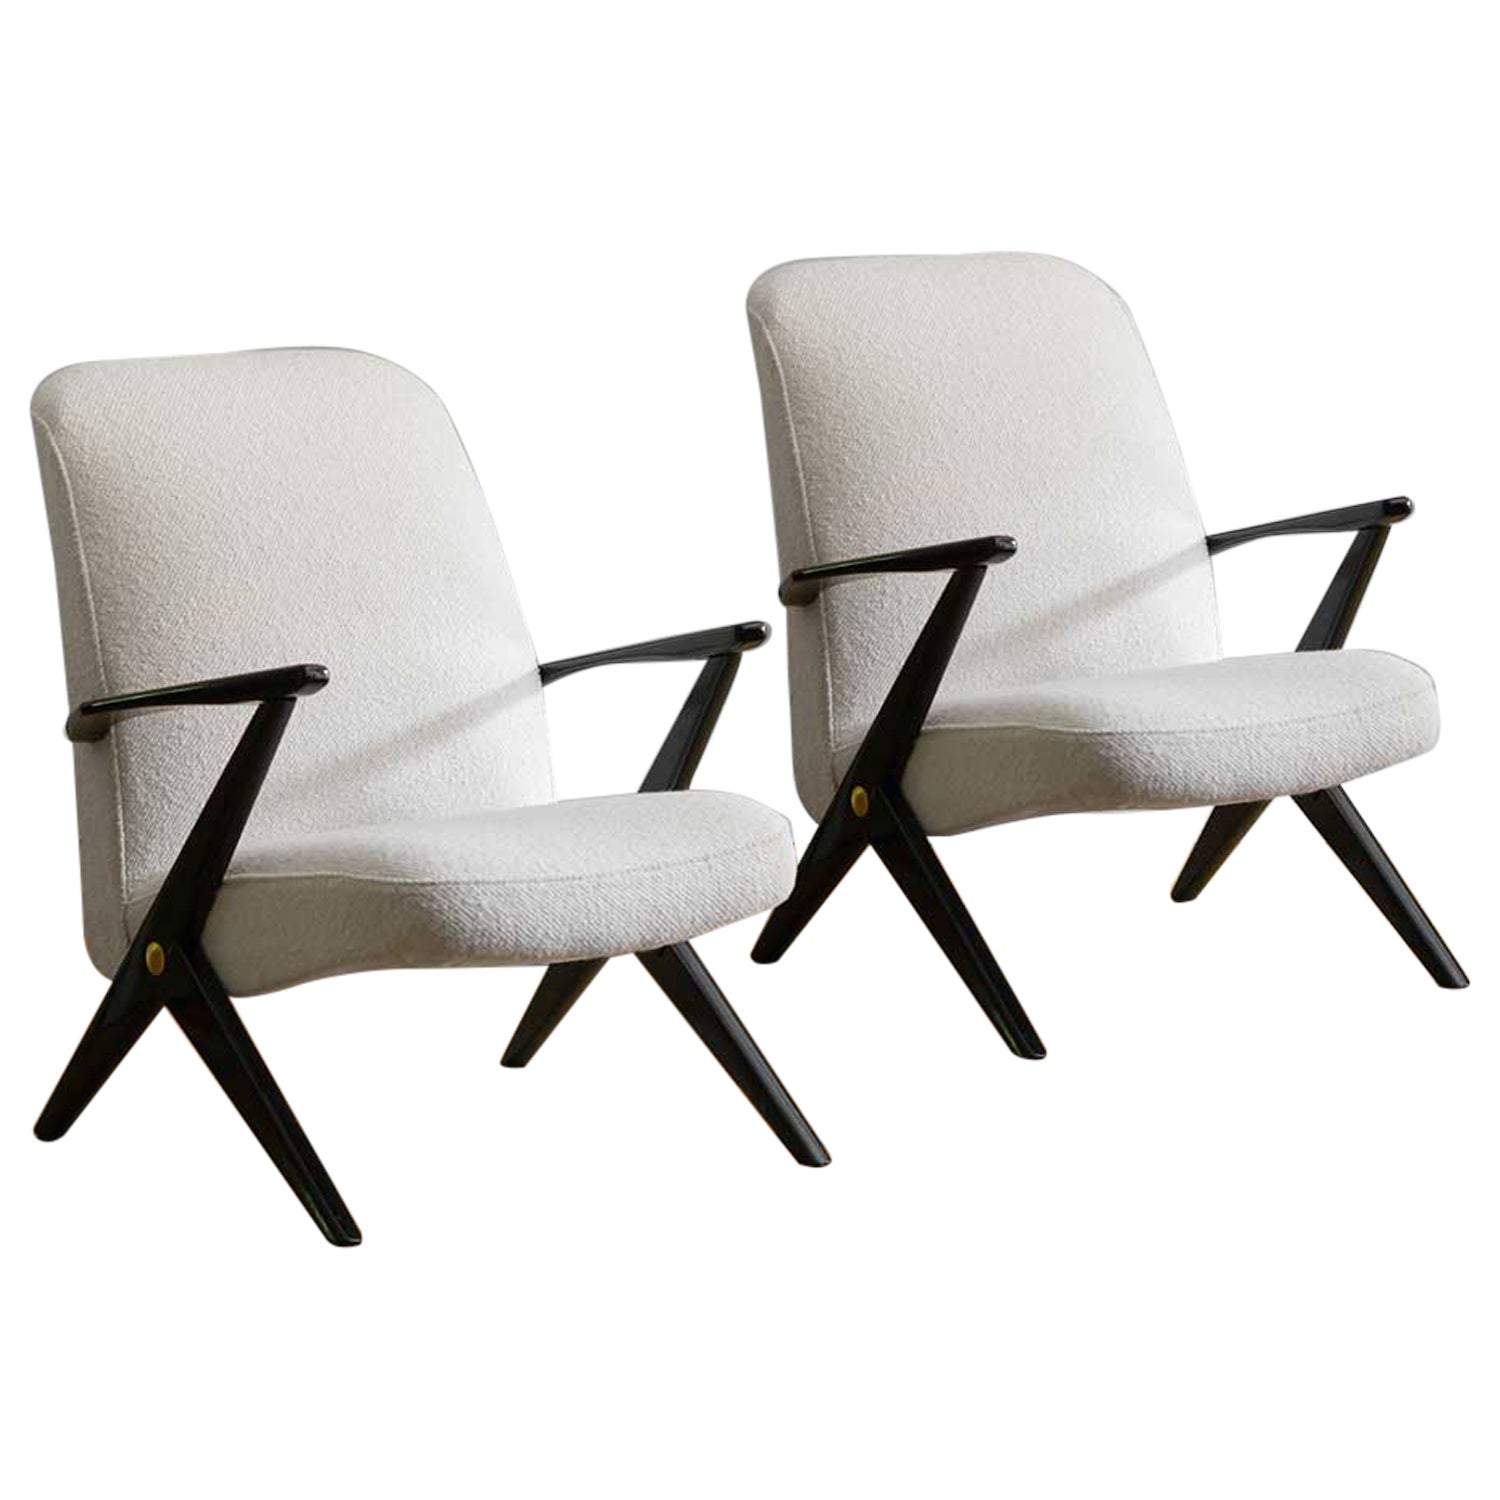 Triva armchairs by Bengt Ruda for Nordisk Kompaniets, 1955 (set of 2)